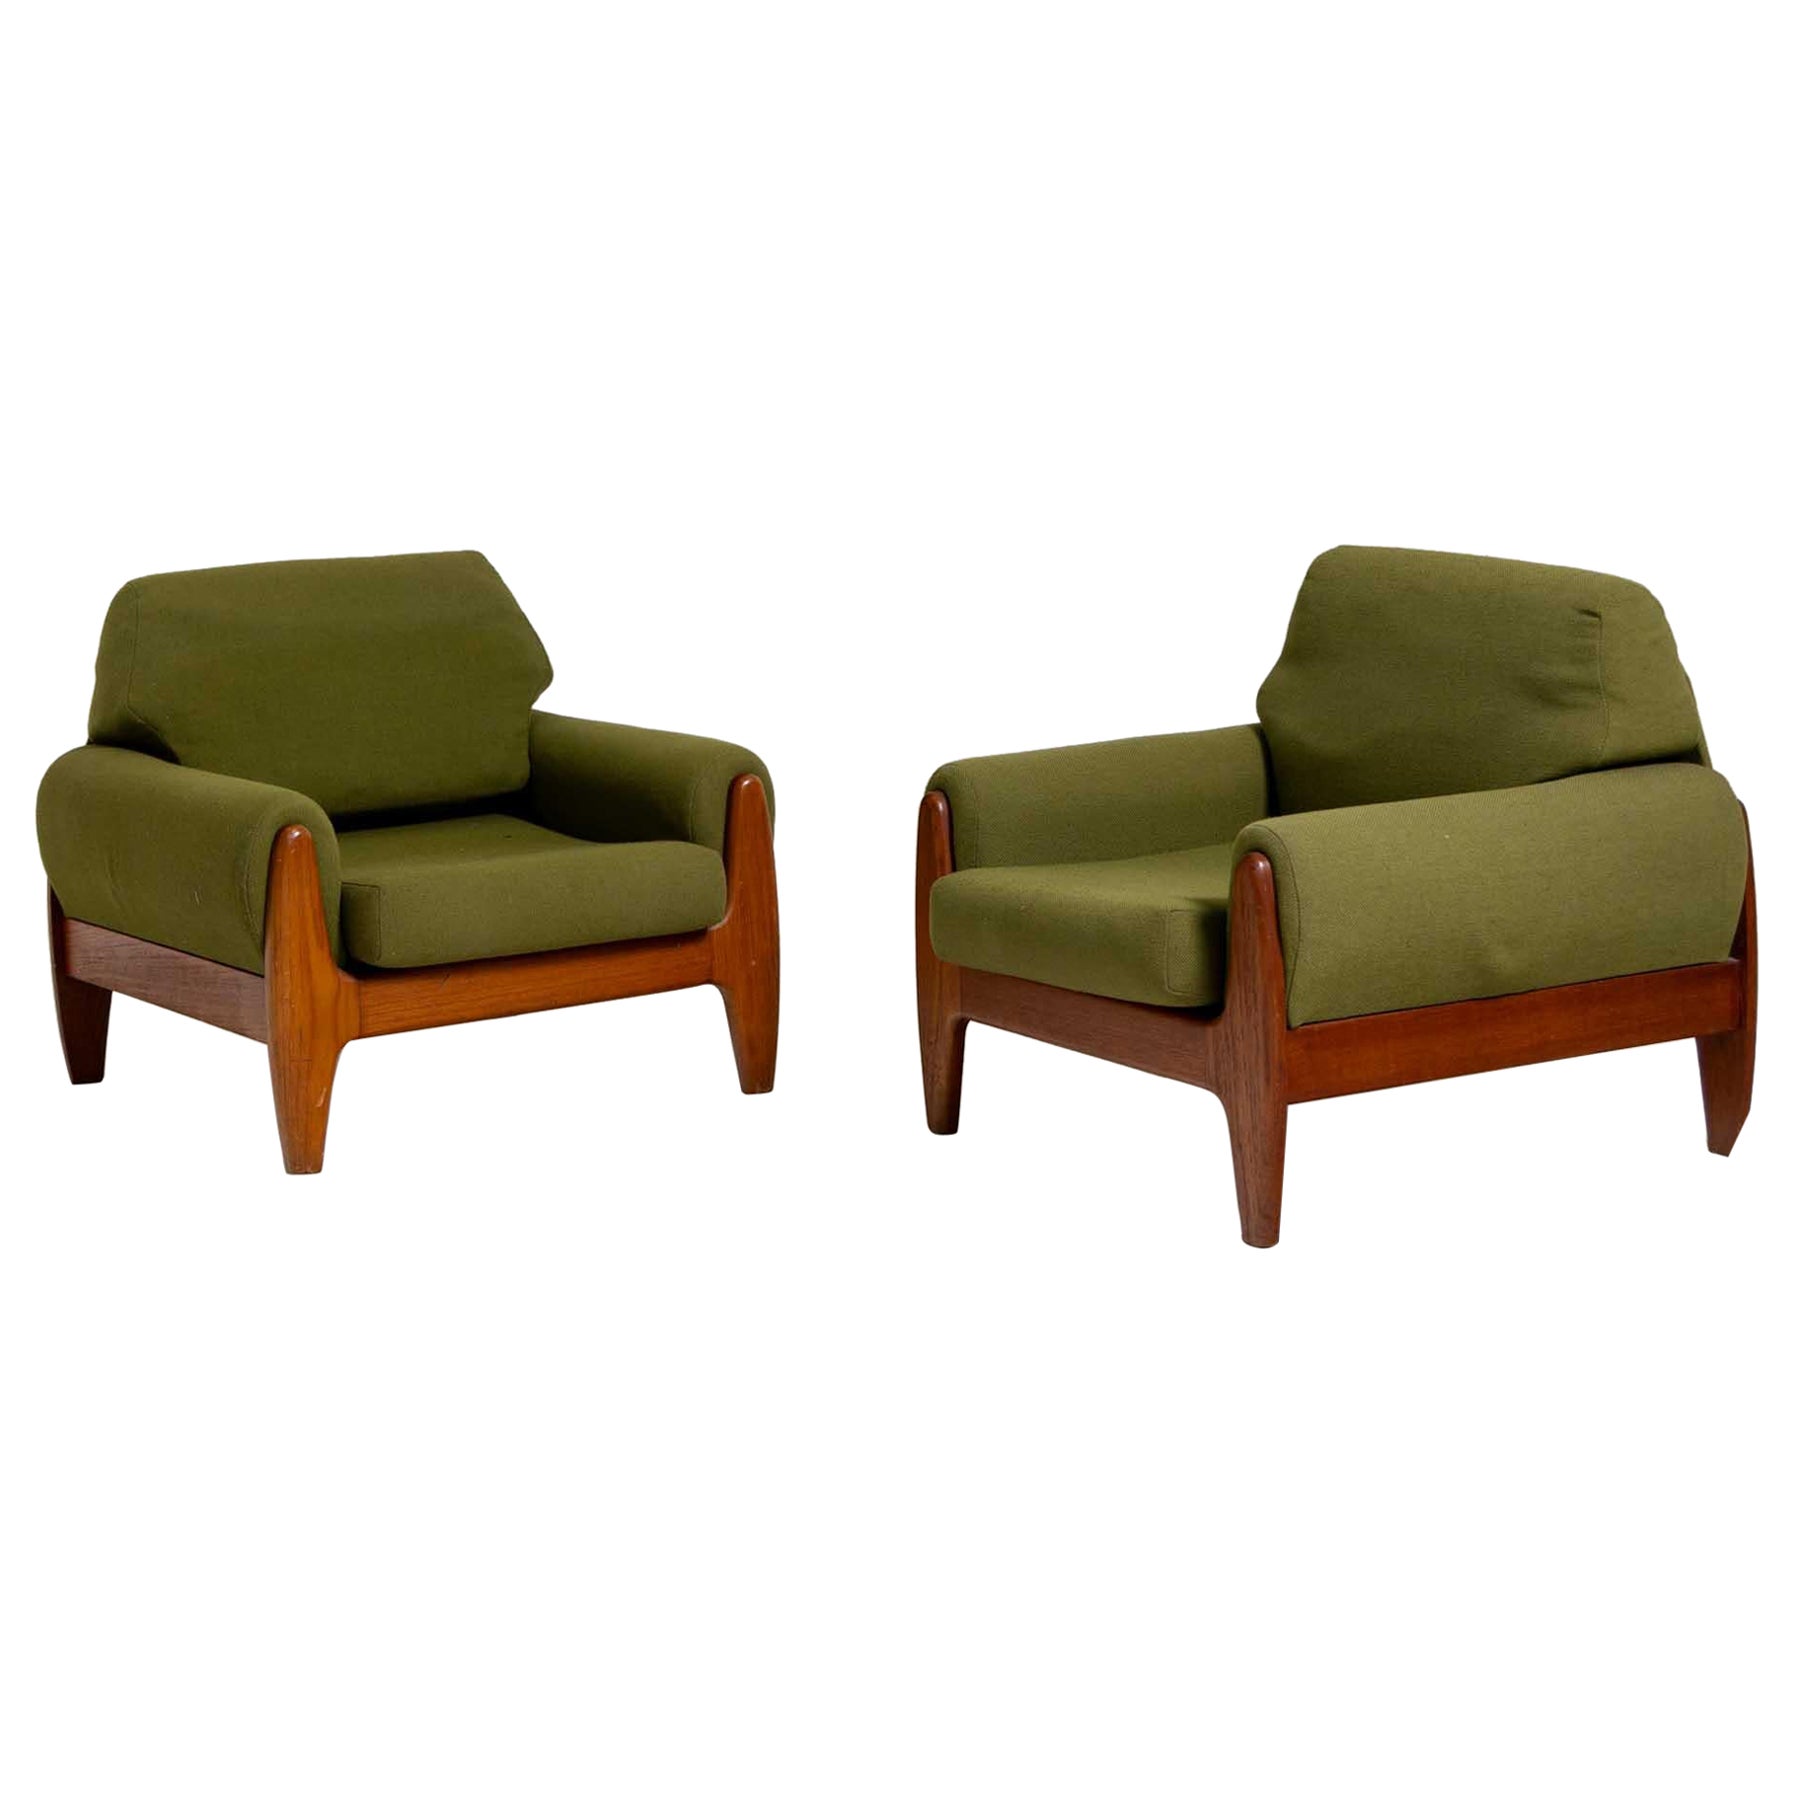 Pair of Armchairs with Green Upholstery, by Illum Denmark, Mid-20th Century For Sale